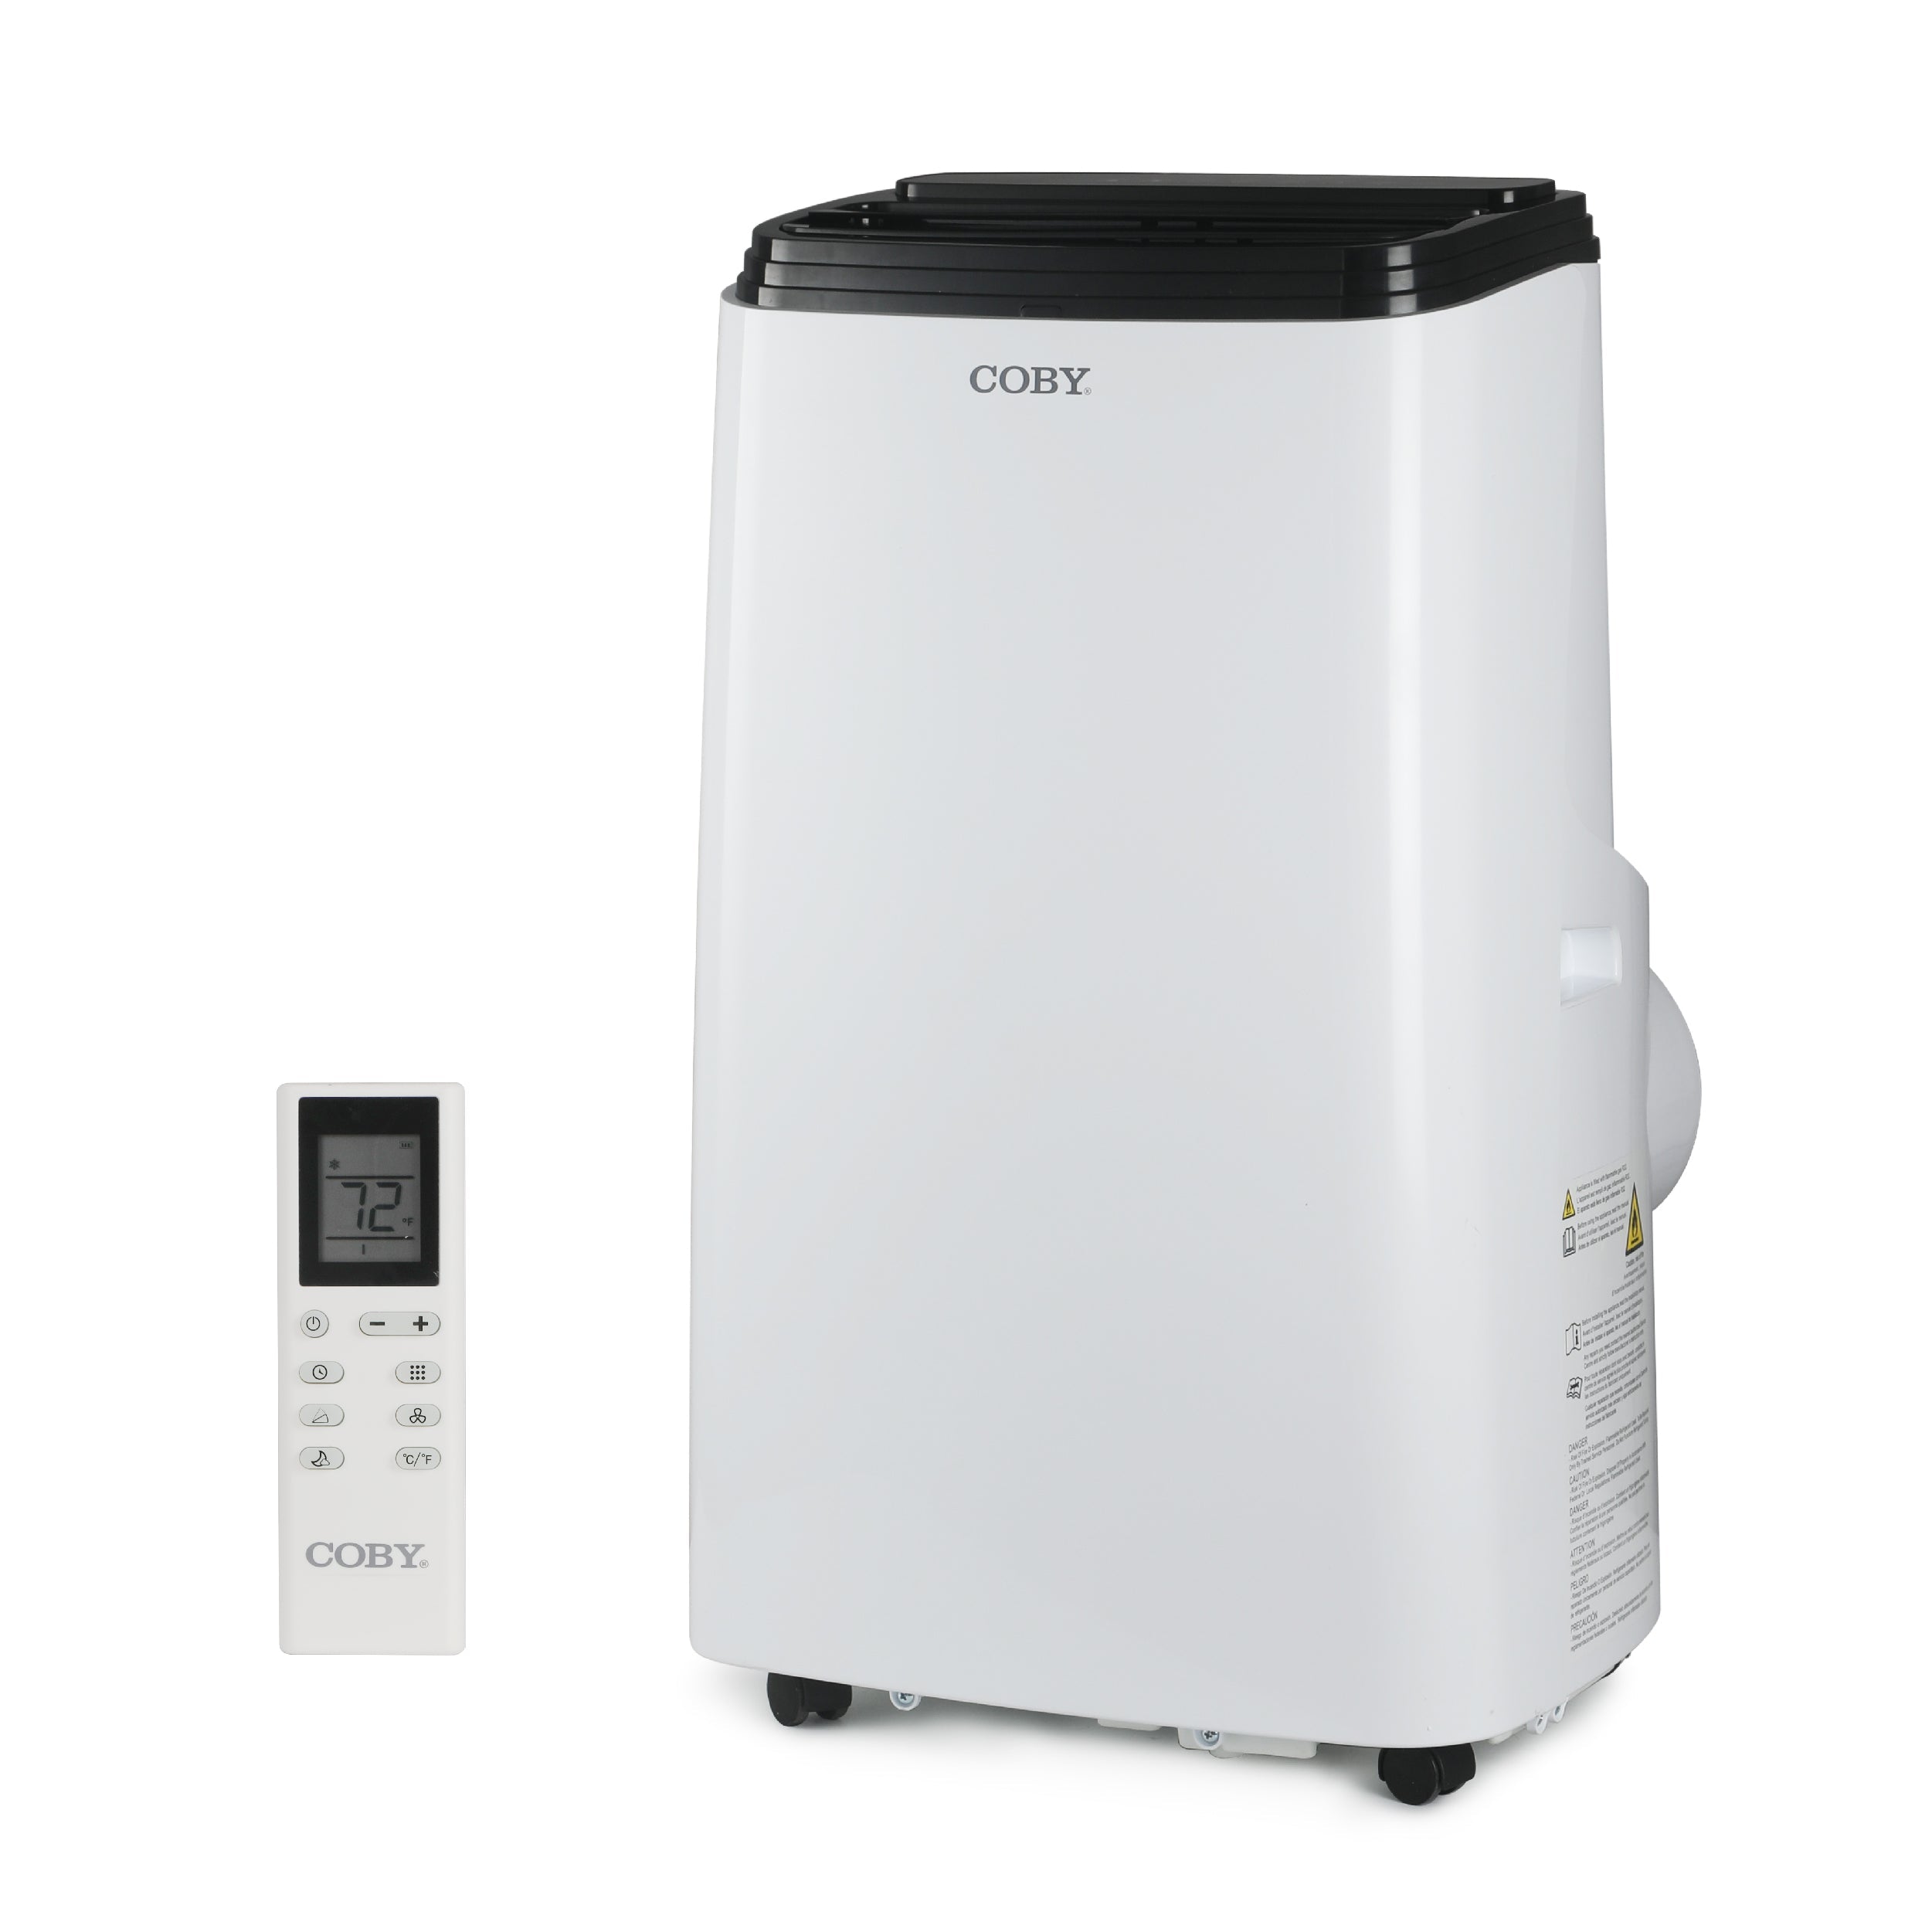 COBY Portable Air Conditioner 3-in-1 AC Unit, Dehumidifier & Fan, Air Conditioner 12,000 BTU Portable AC Unit with Remote Control for Rooms up to 550 Sq. Ft., 24-Hour Timer, & Installation Kit